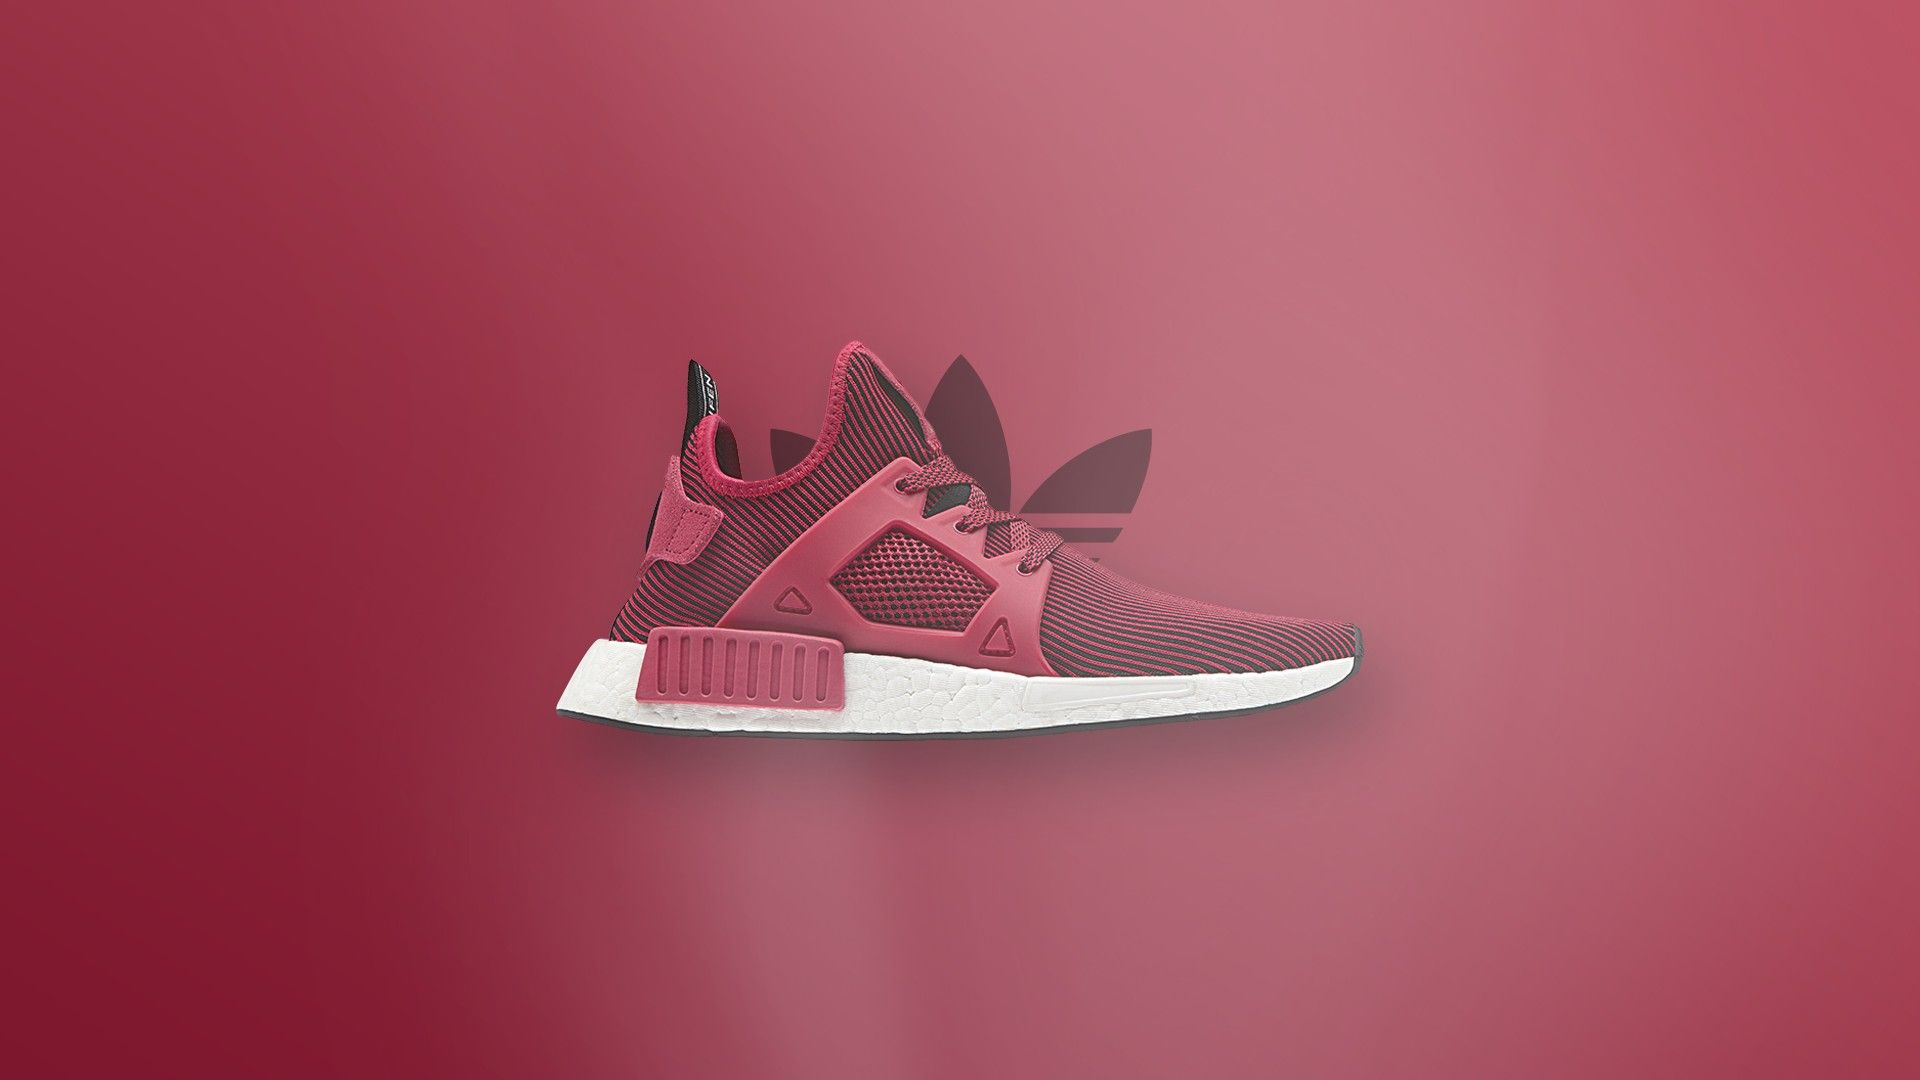 Adidas, Shoes, Pink shoes, Minimalistic shoe, RX1R, Red shoes Wallpaper HD / Desktop and Mobile Background